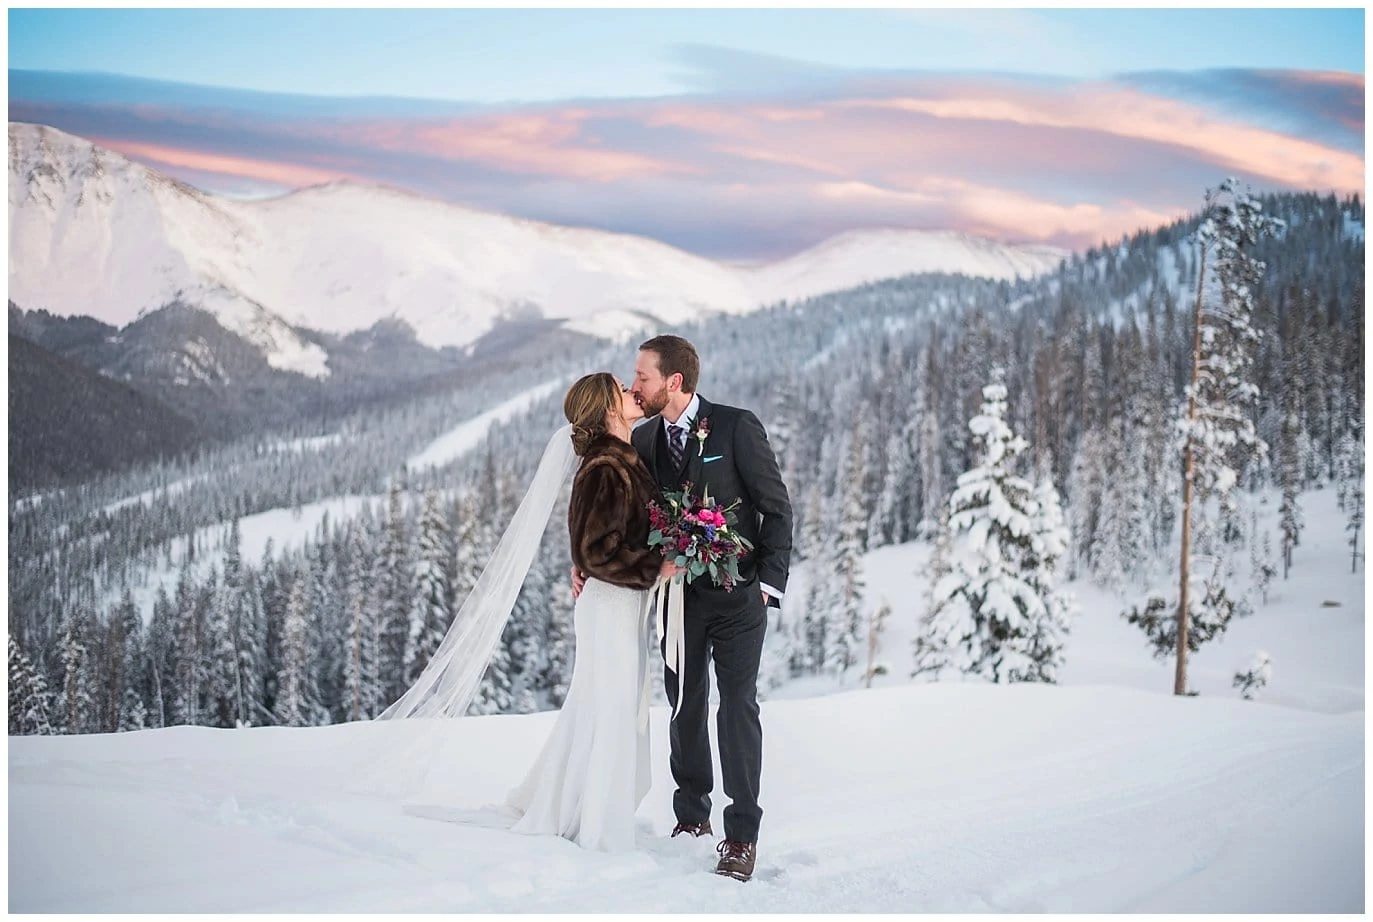 6 Tips for Planning a Destination Wedding by Colorado Wedding Photographer Jennie Crate